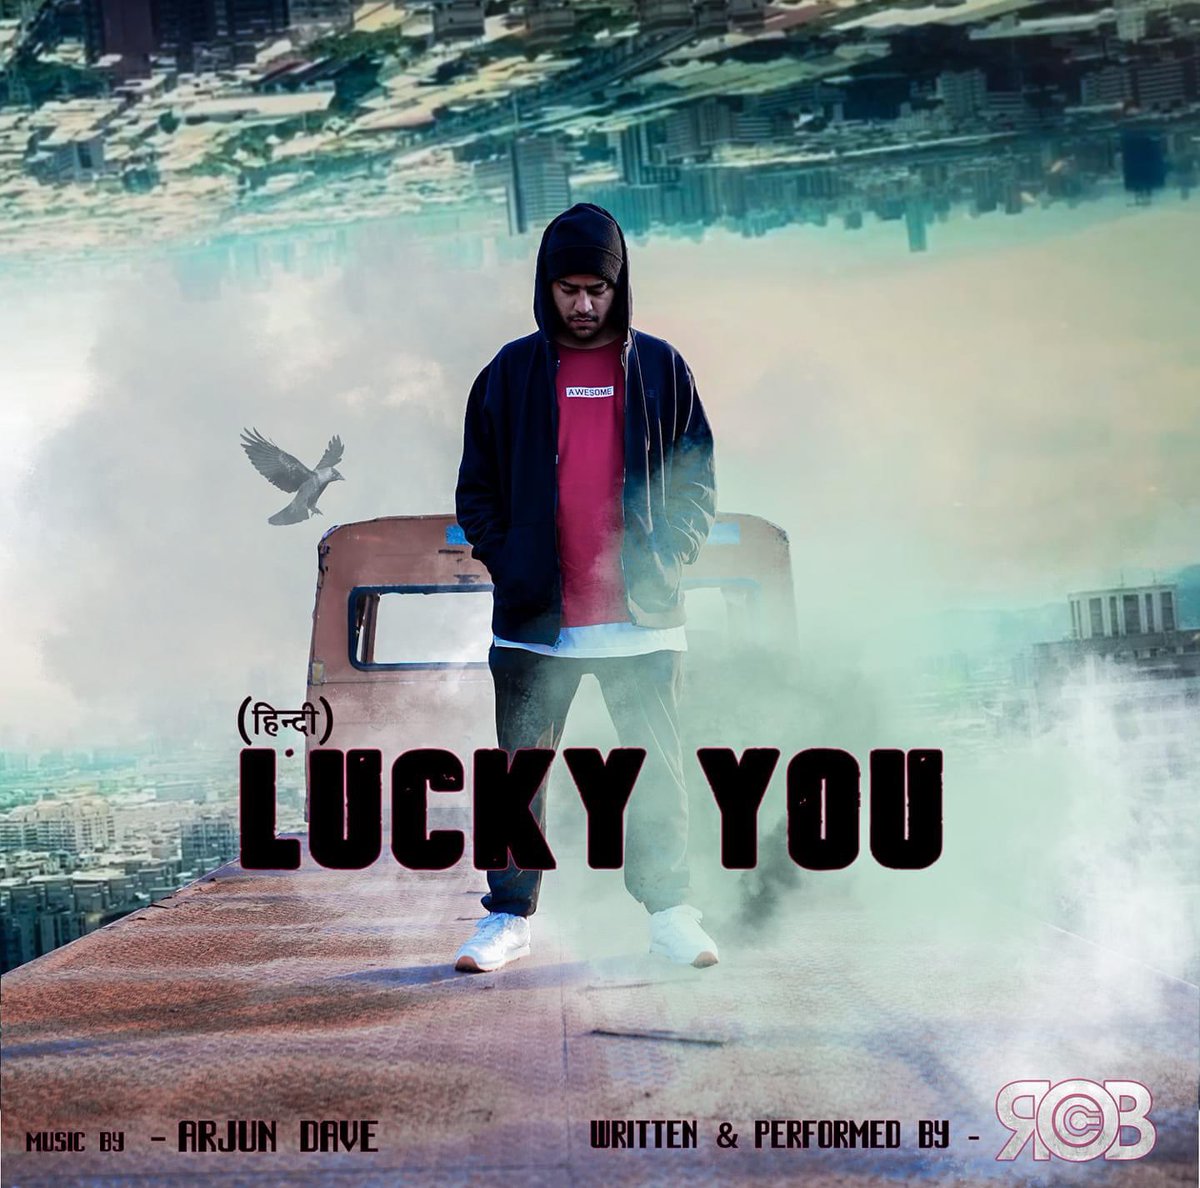 Throwback: youtu.be/h9YklVV5W9I?si…

#robc #luckyyou #hindirap #hiphop